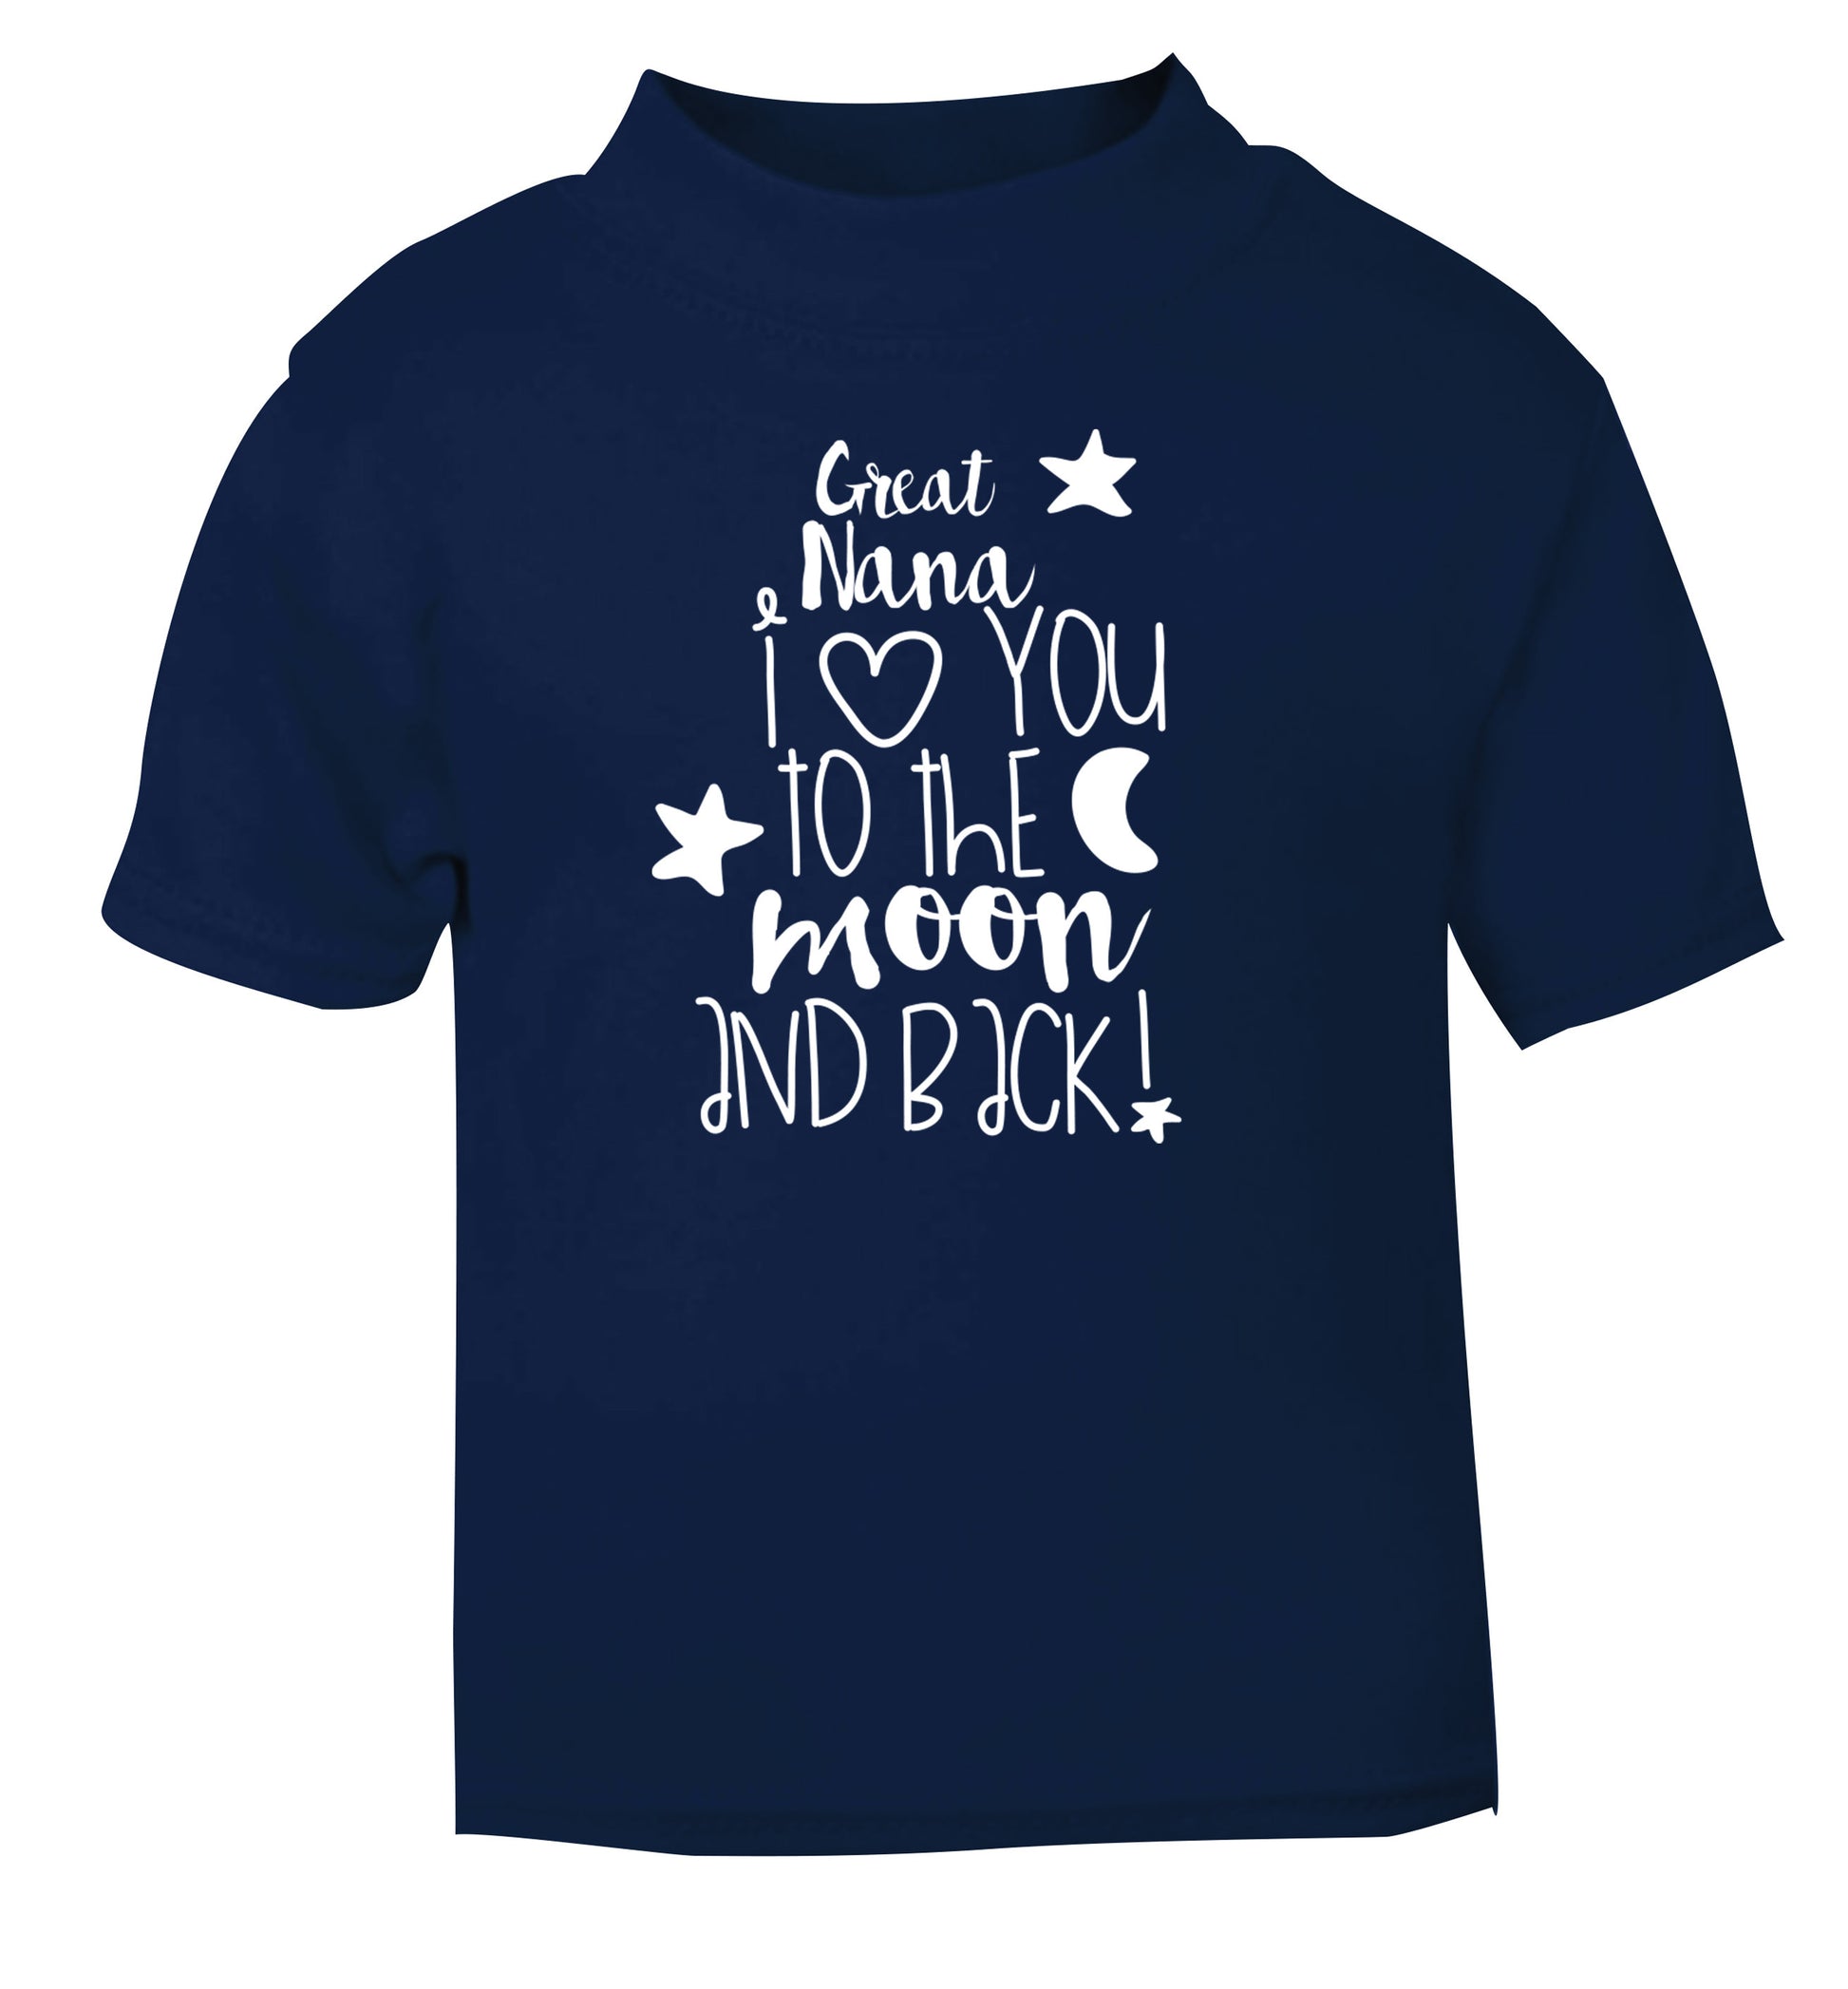 Great Nana I love you to the moon and back navy Baby Toddler Tshirt 2 Years